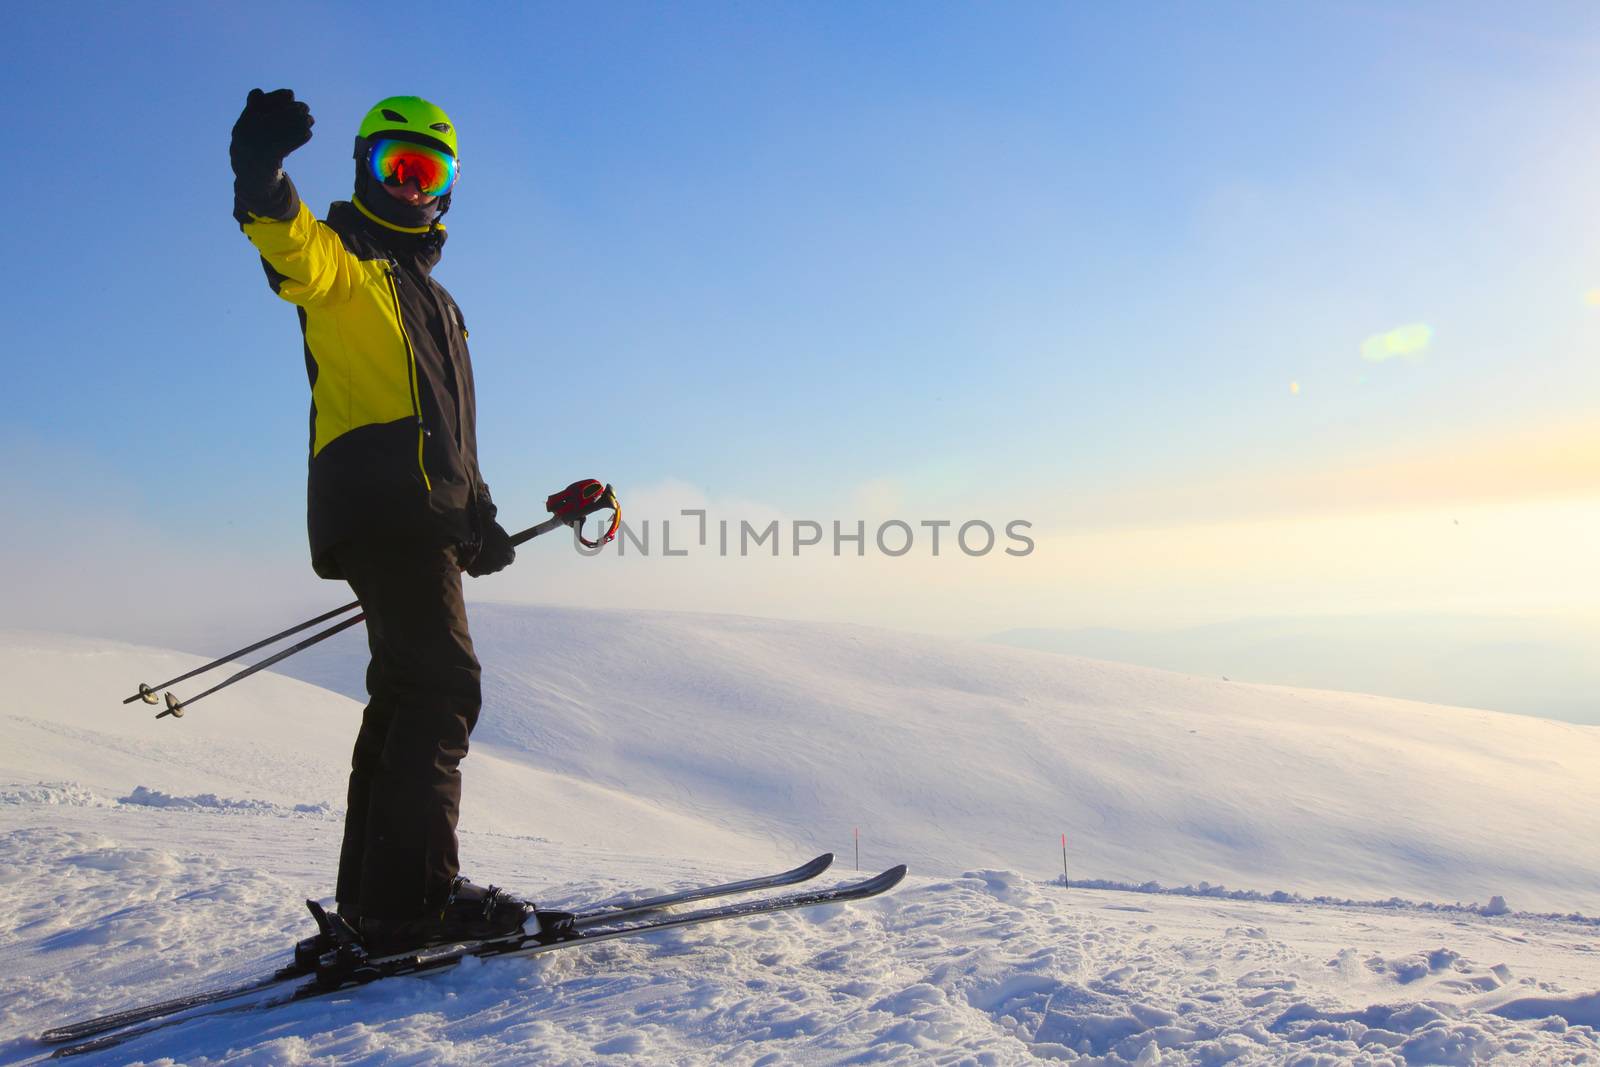 Skier on ski slope with mountains in background